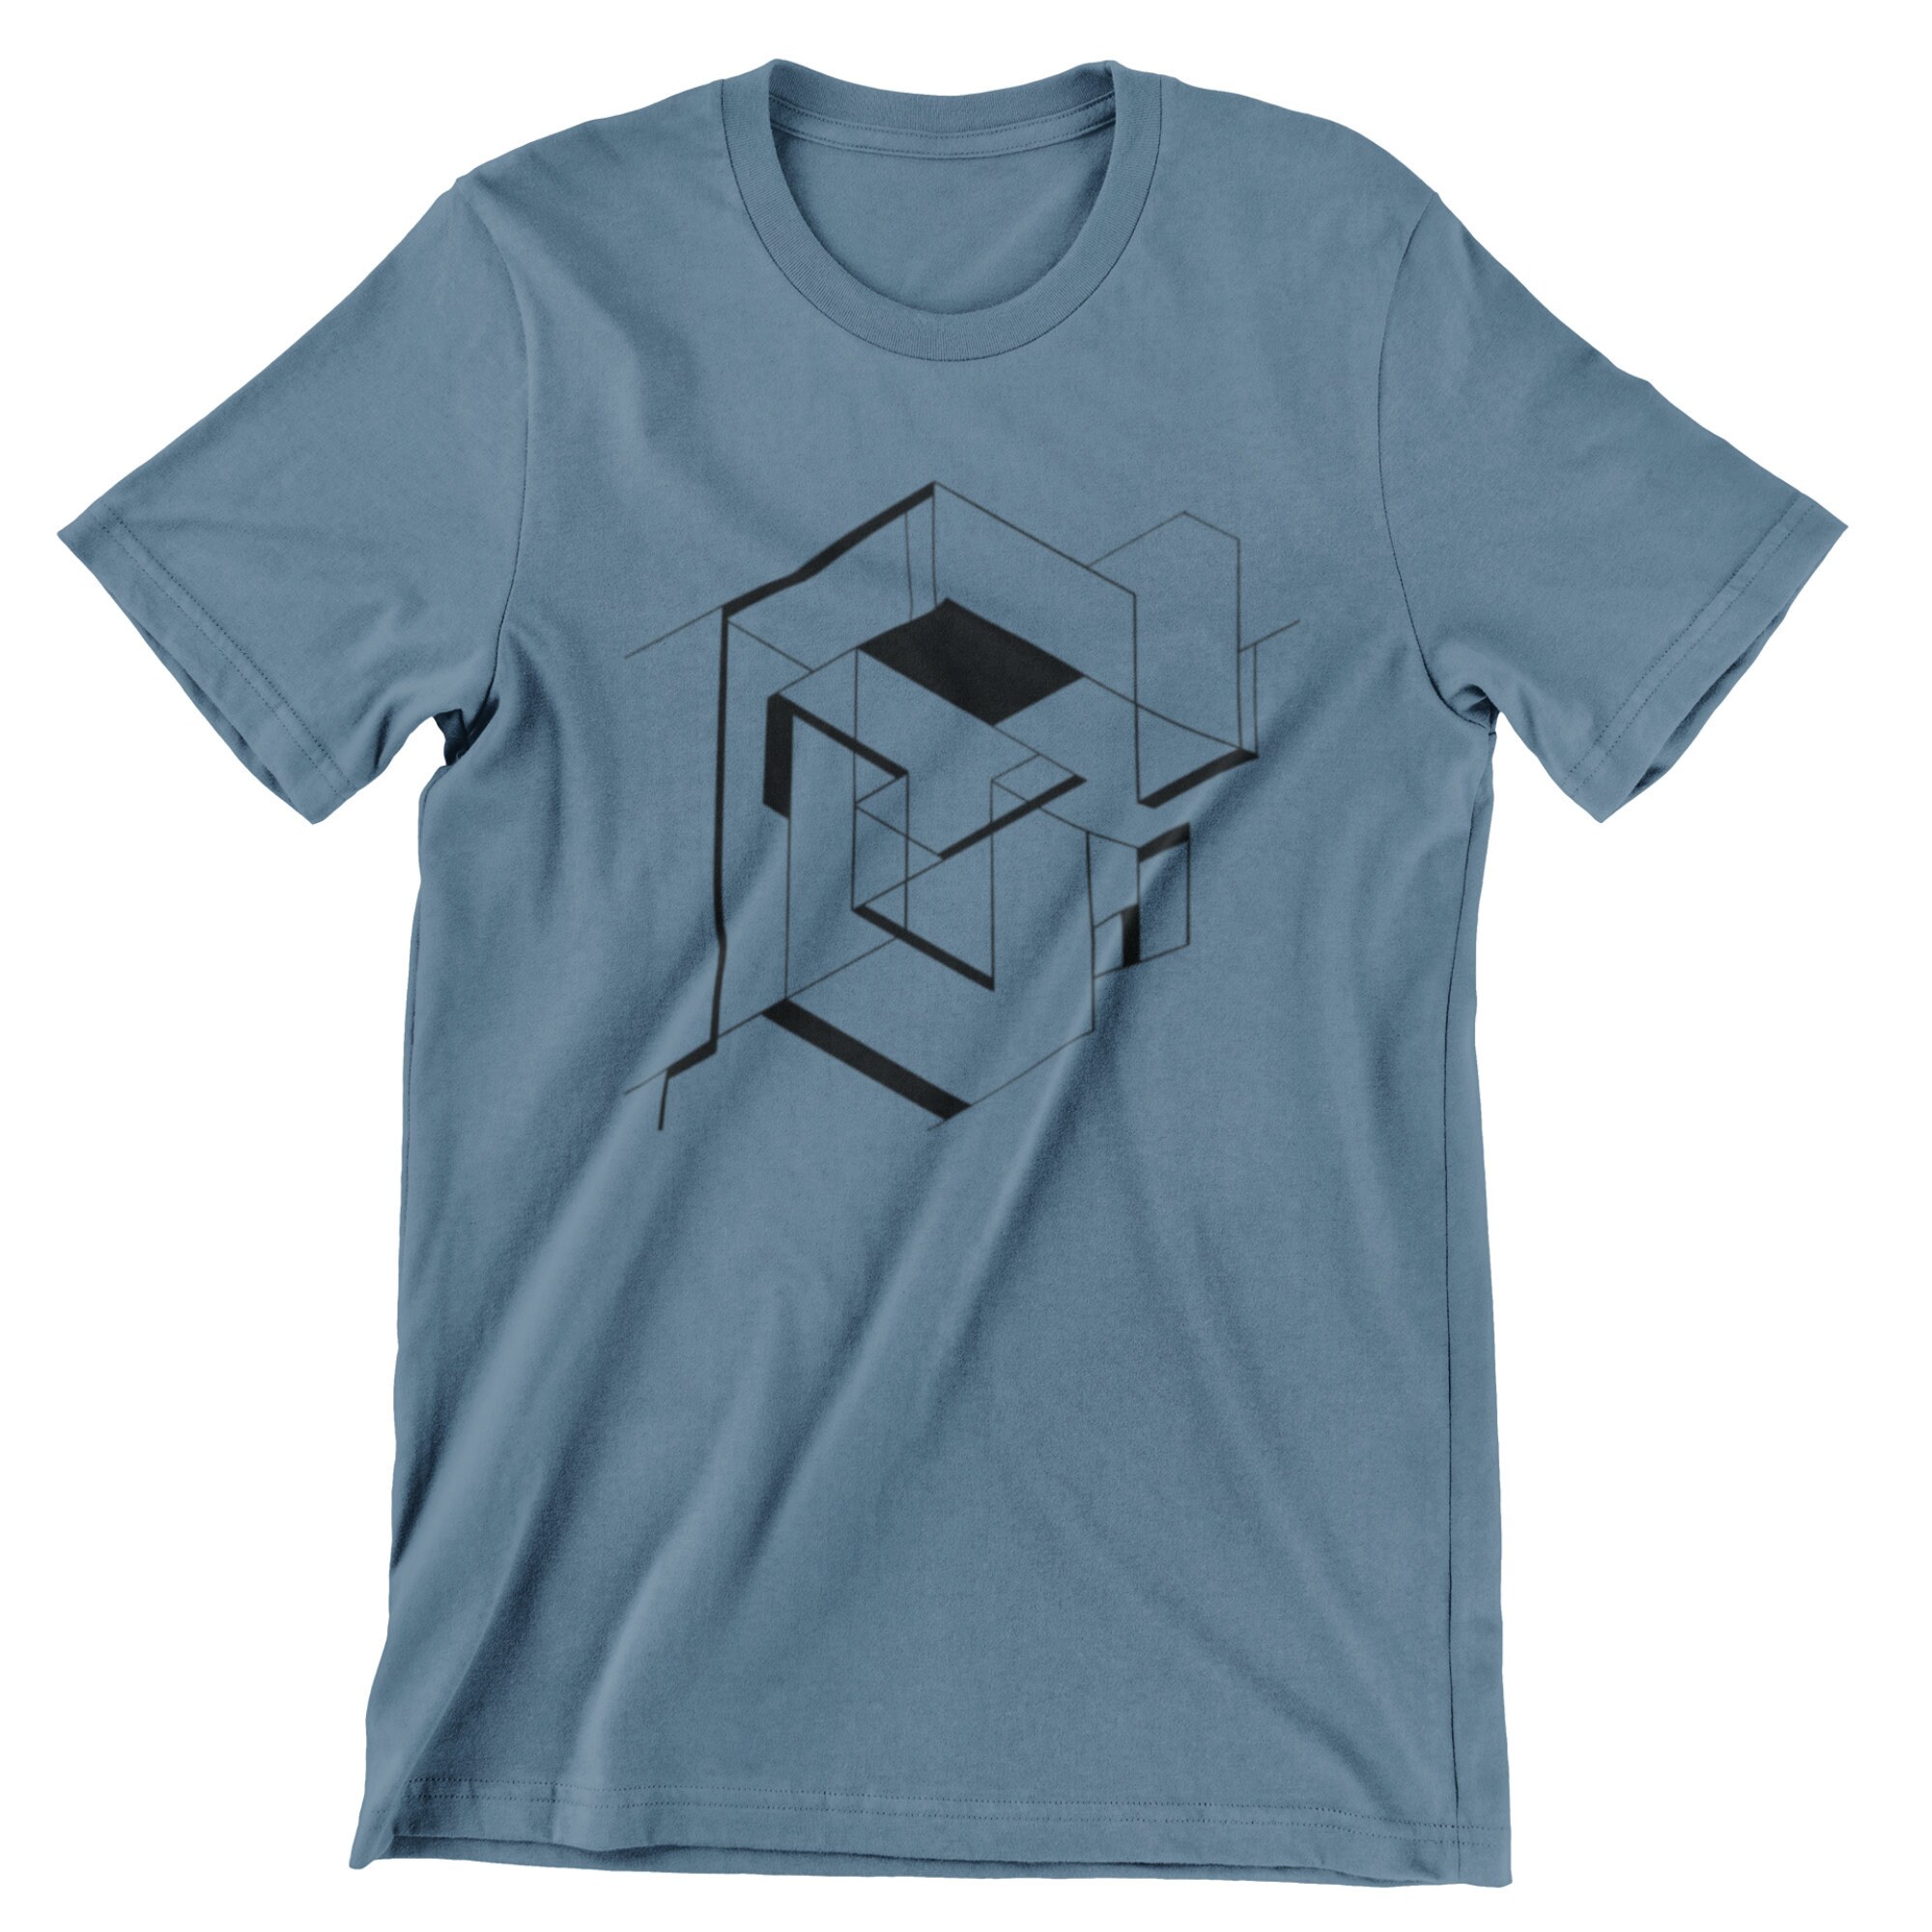 Geometric Line Forms T-shirt Minimalist Graphic Tees Made by | Etsy